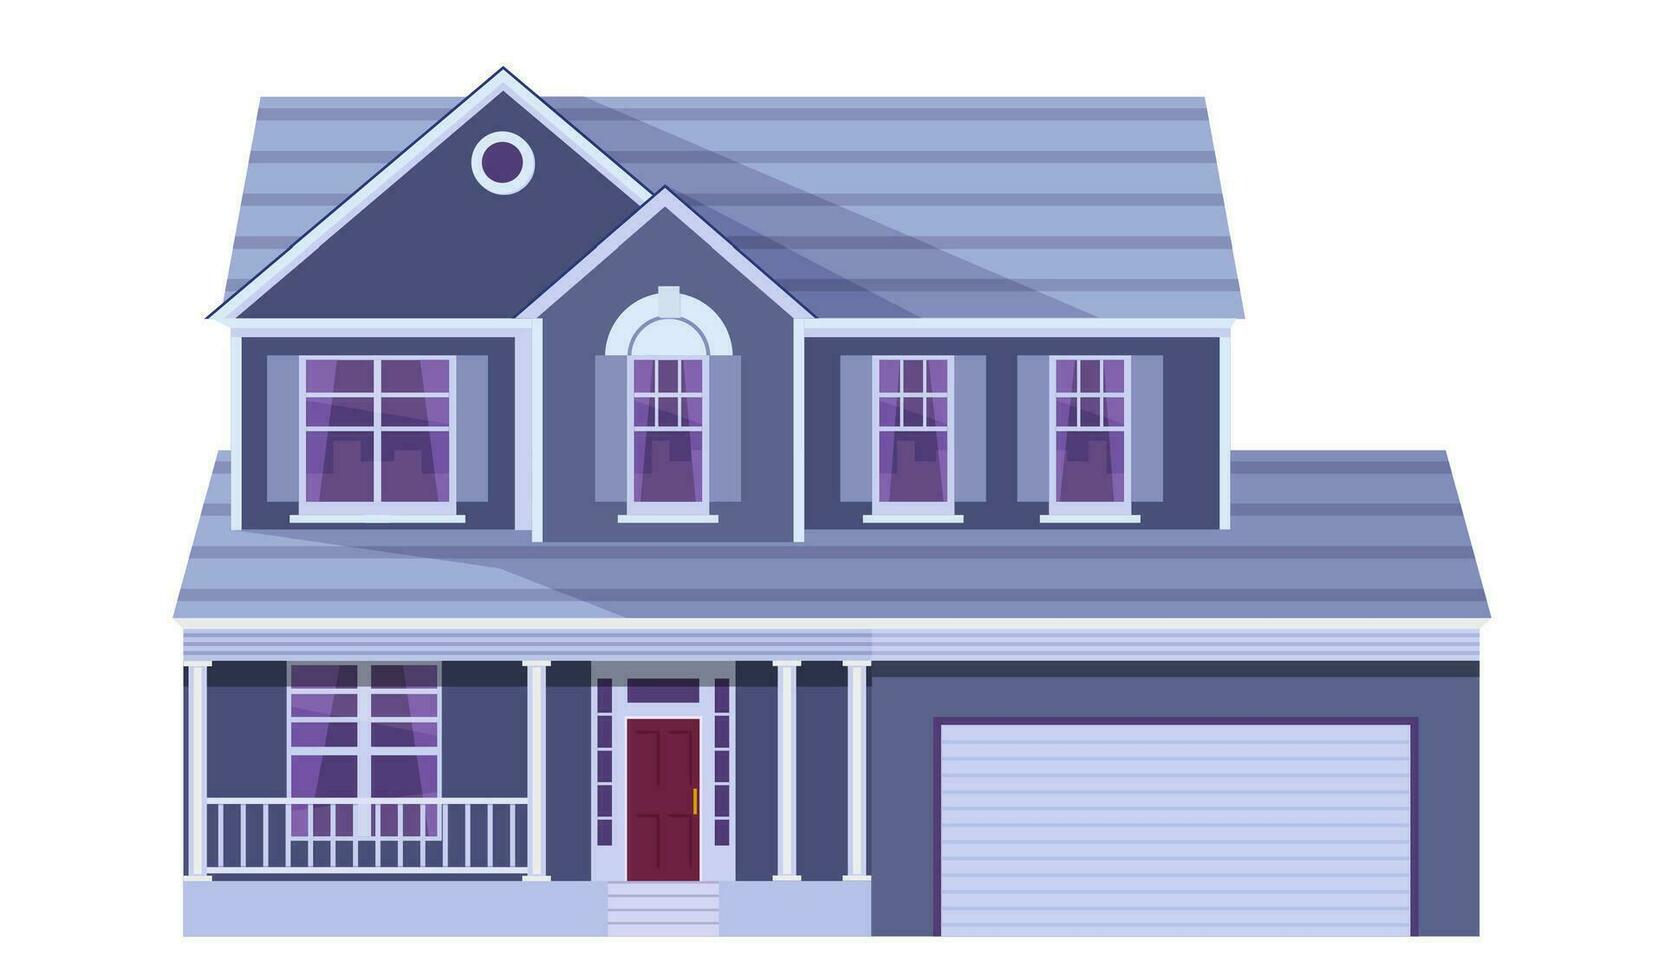 cute cartoon house. Two storey dwelling place with garage. Townhouse building. Home facade with door and windows. Vector illustration in flat style